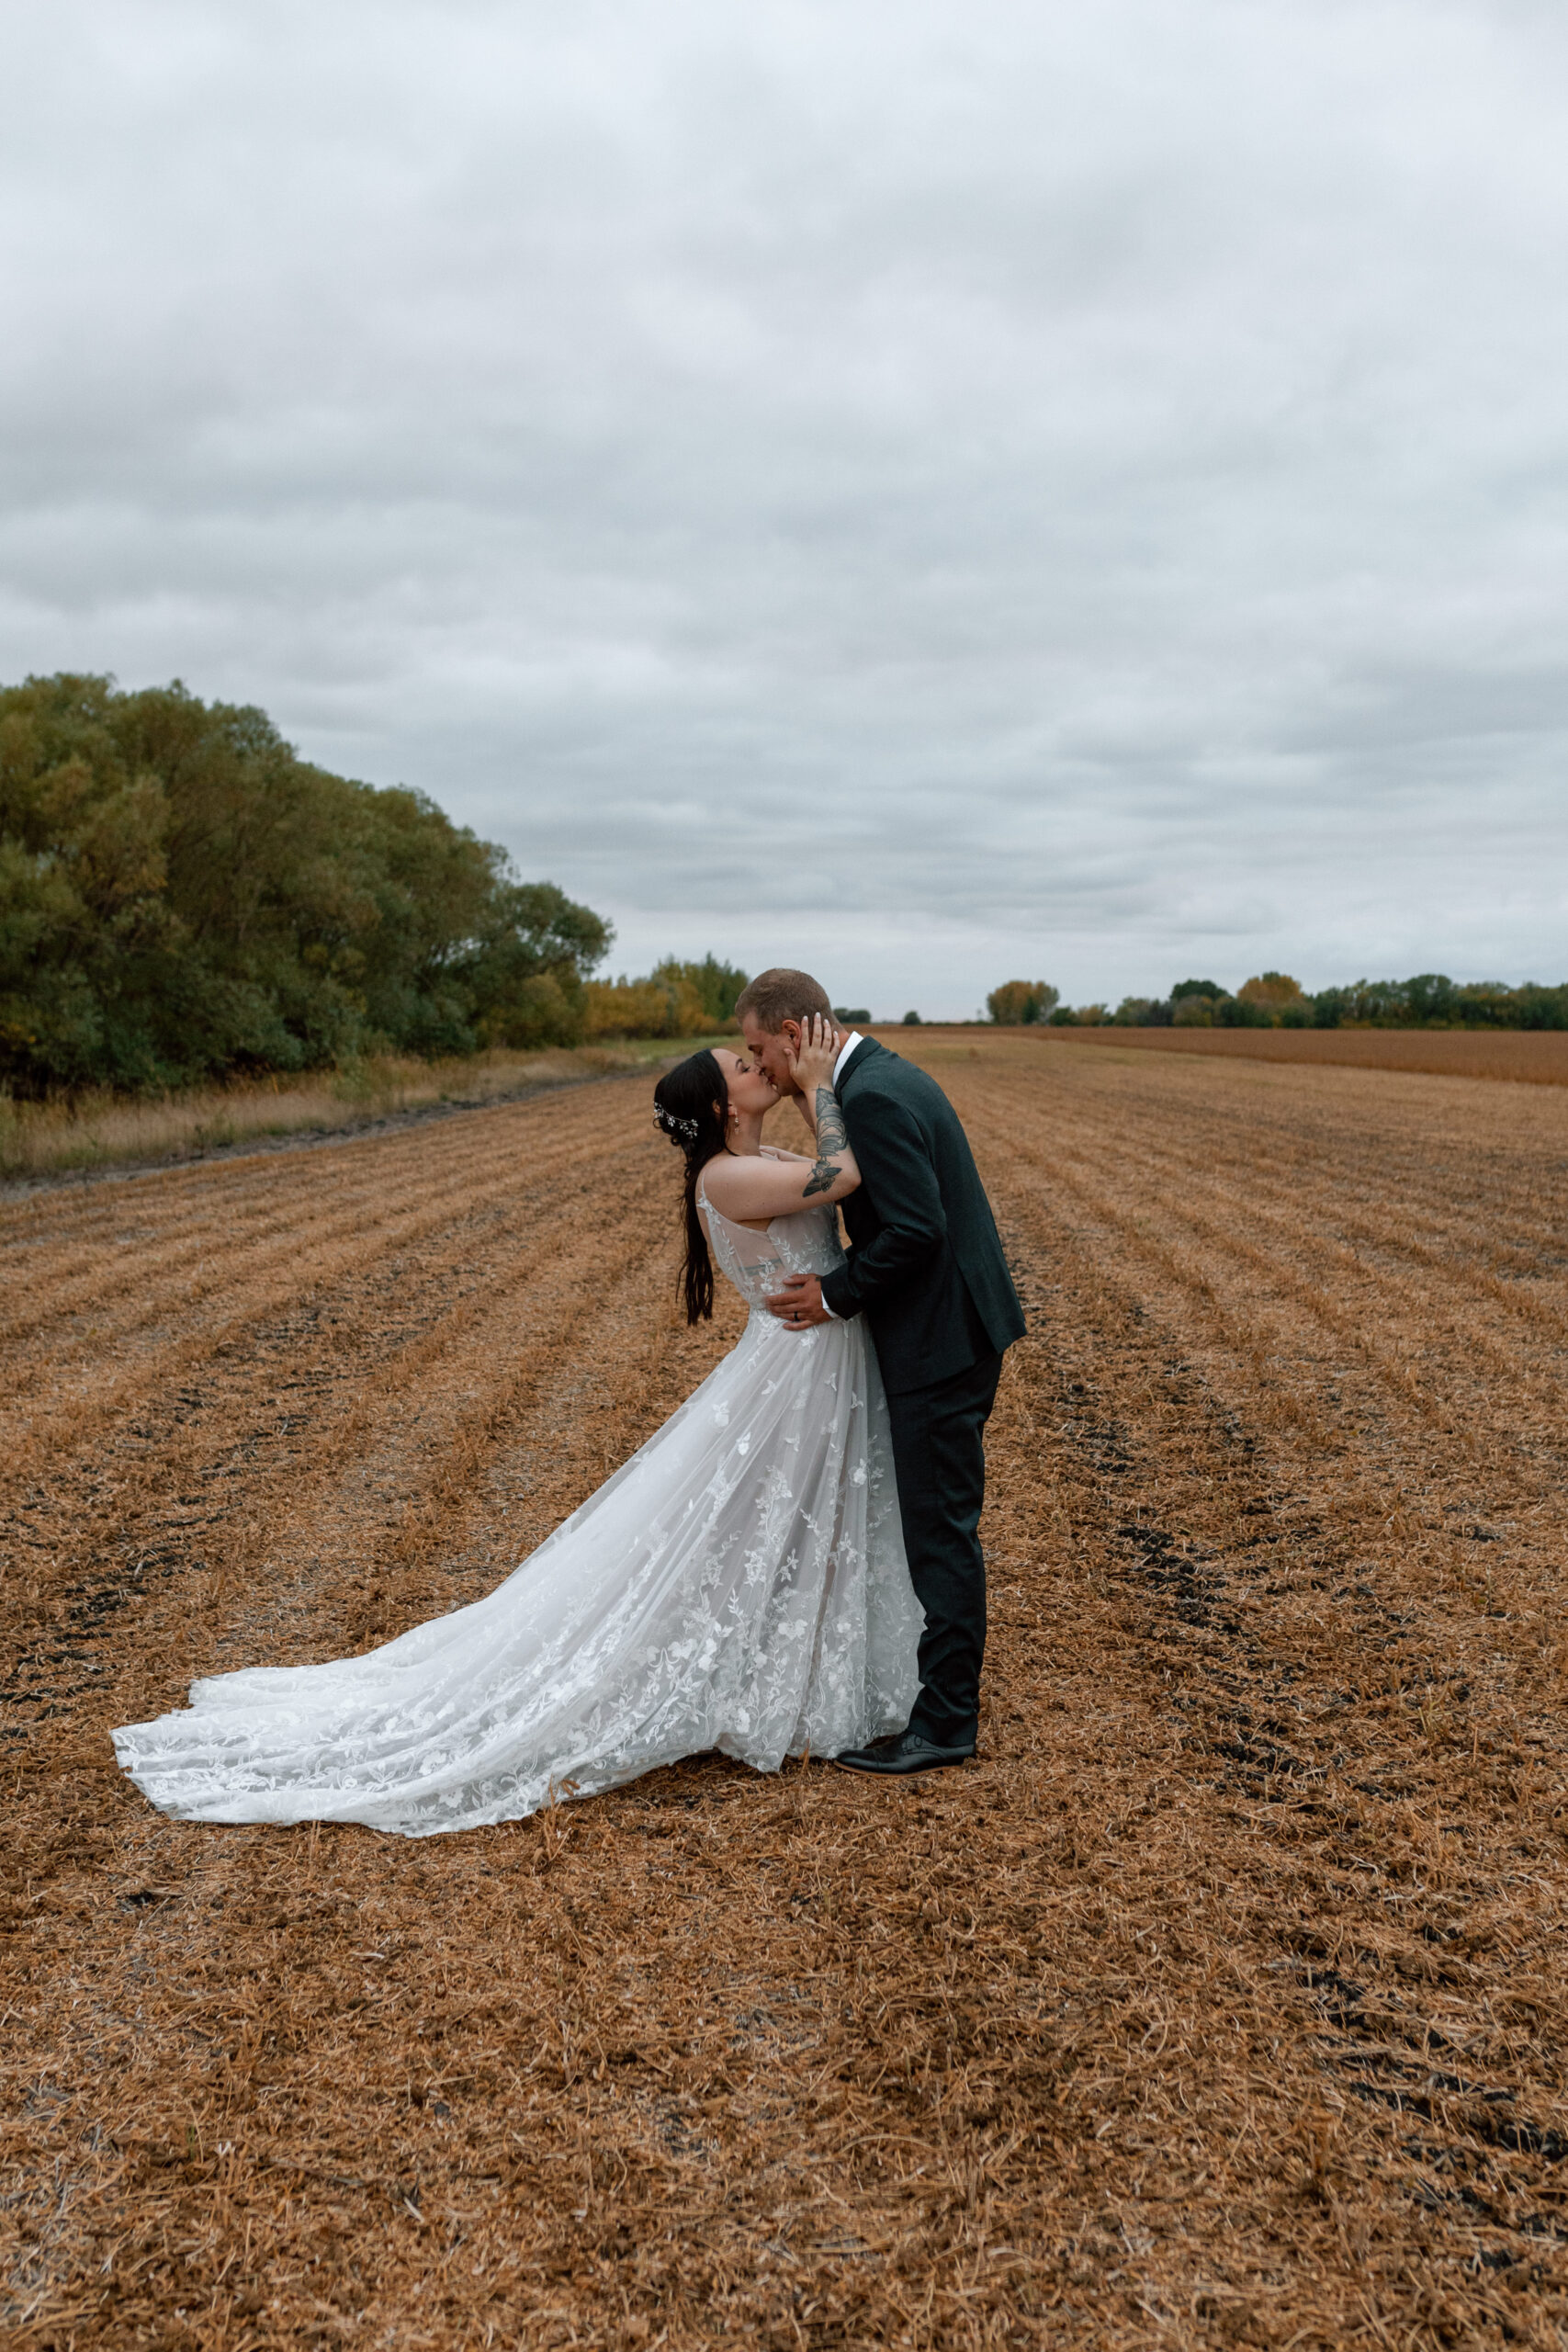 bride and groom kissing in wheat field